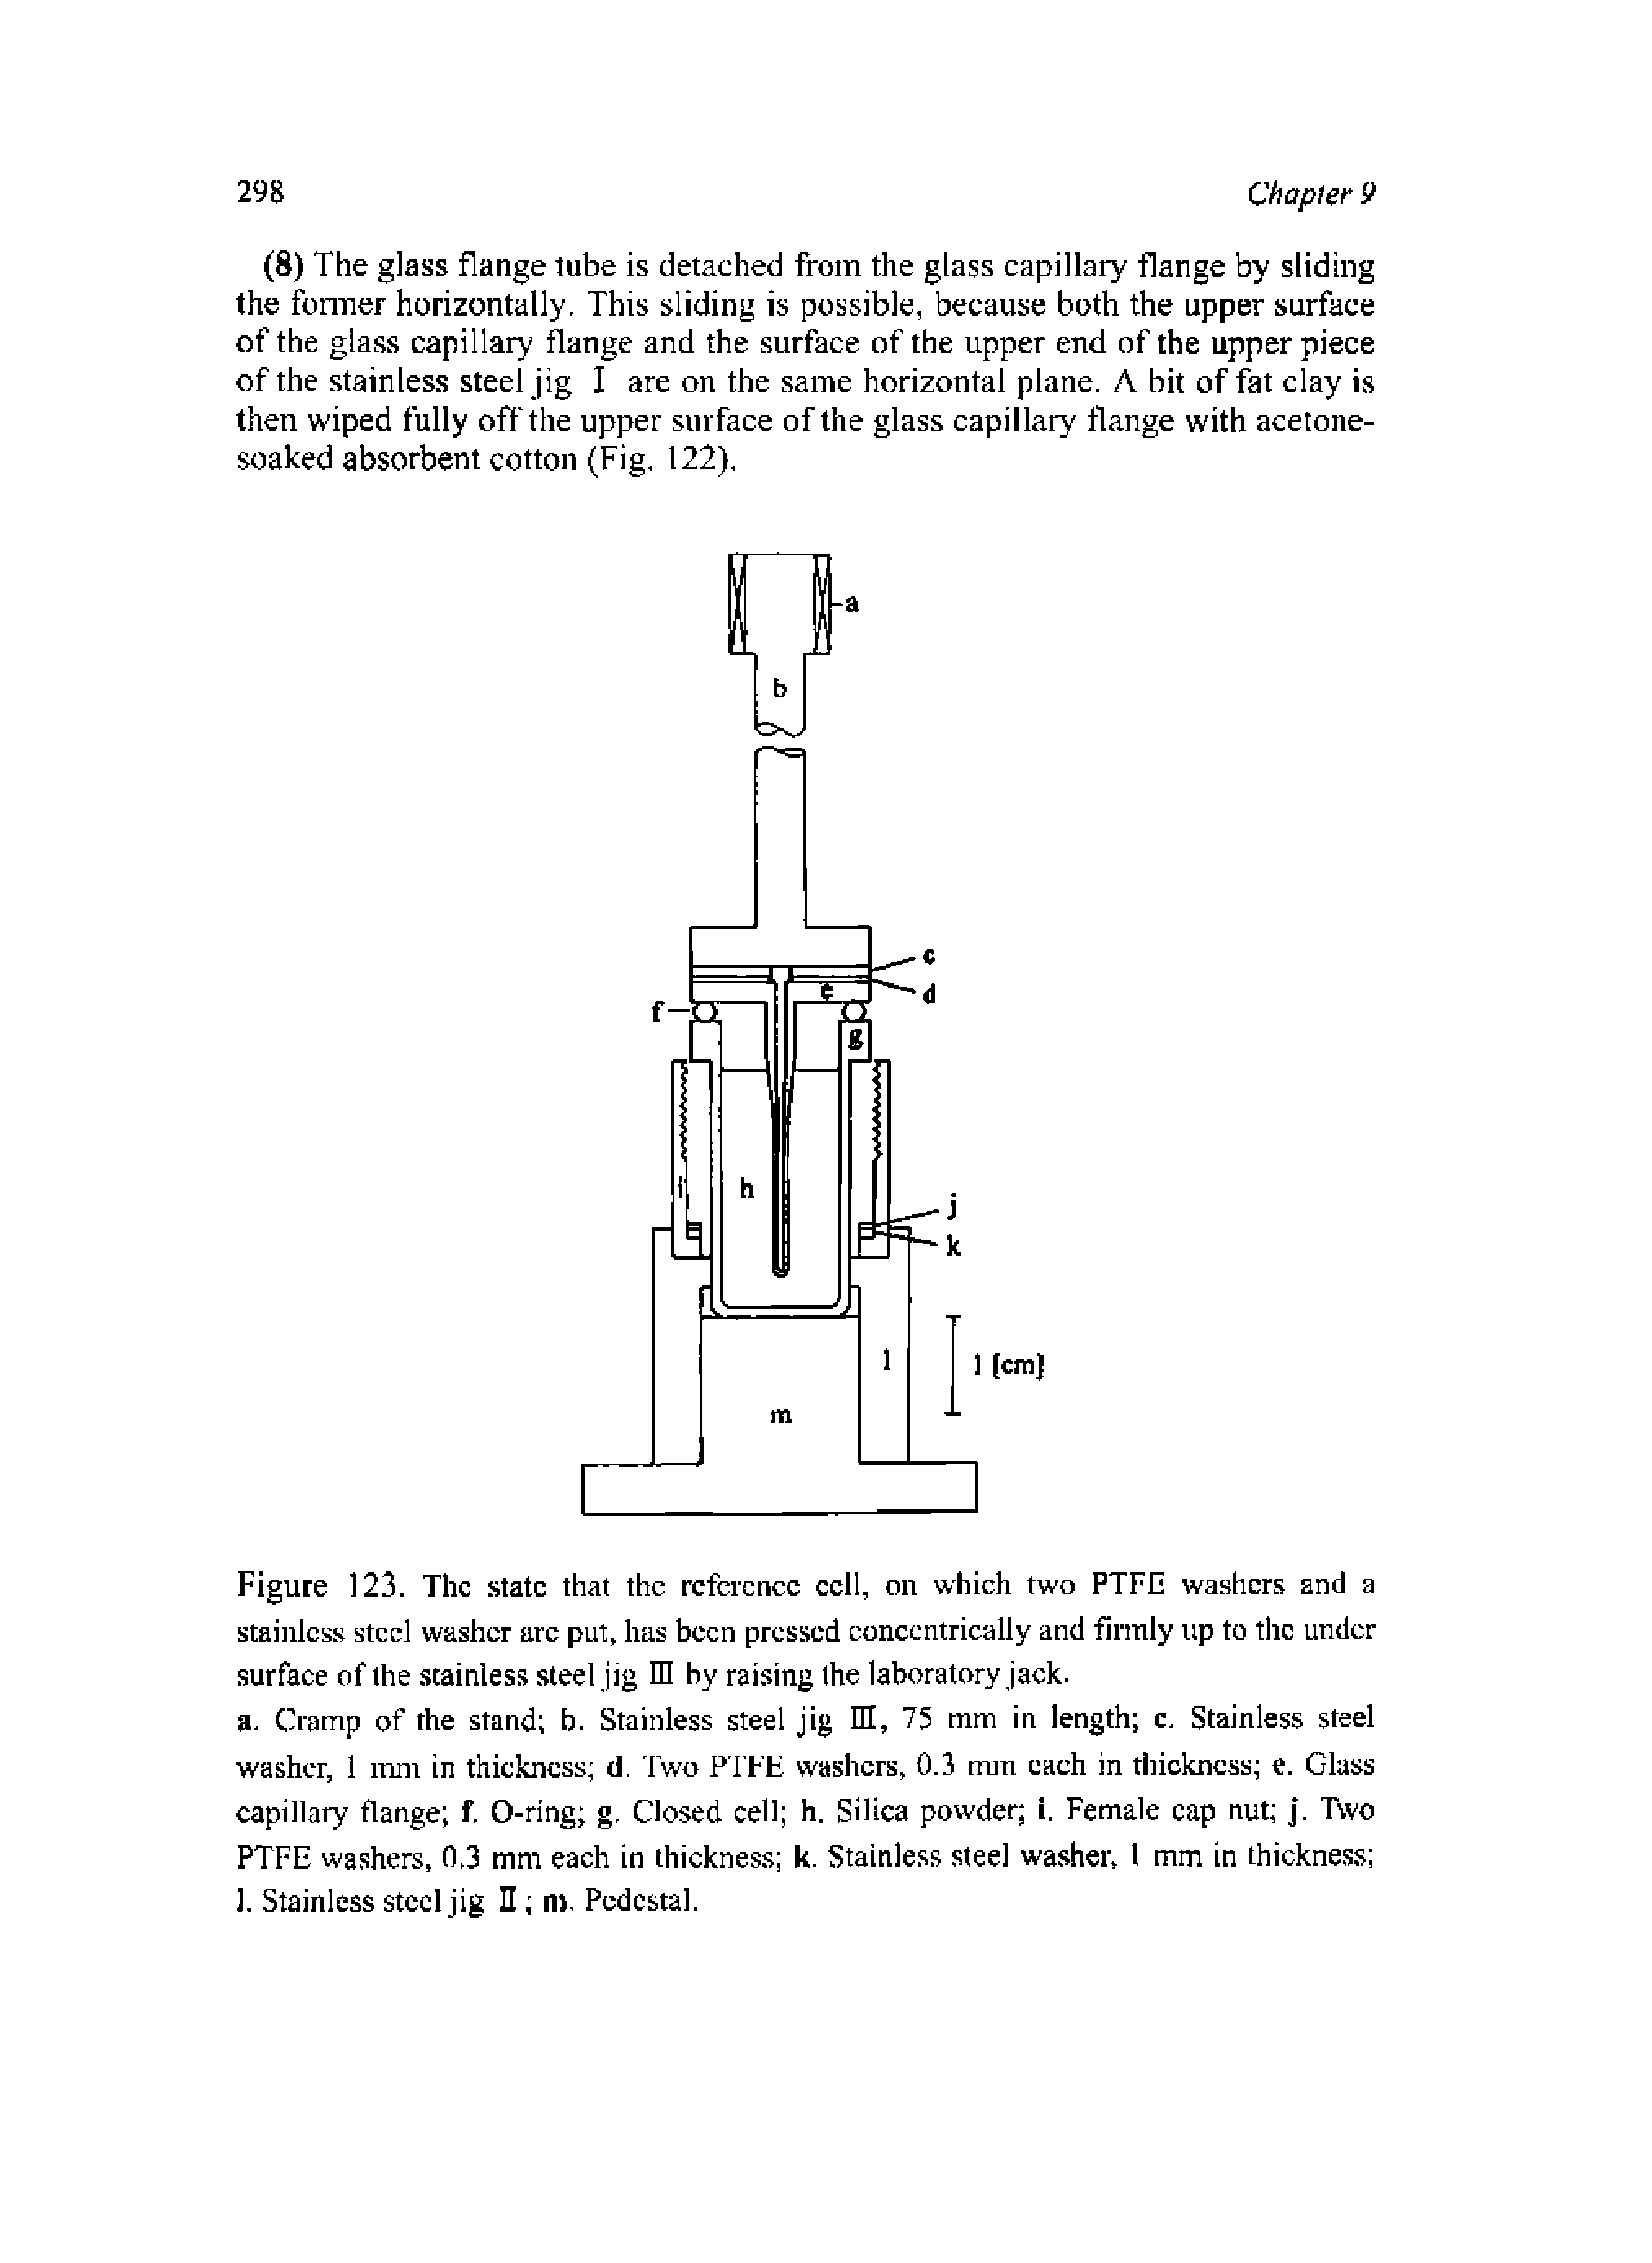 Figure 123. The state that the reference cell, on which two PTFE washers and a stainless steel washer are put, has been pressed eoneentrically and firmly up to the under surface of the stainless steel jig in by raising the laboratory jack, a. Cramp of rhe srand b. Srainless steel jig HI, 75 mm in length c. Stainless steel washer, 1 mm in thiekness d. Two PITT washers, 0.3 mm each in thickness e. Glass capillary flange f, 0-ring g. Closed cell h. Silica powder i. Female cap nut j. Two PTFE washers, 0.3 mm each in thickness k. Stainless steel washer, 1 mm in thickness 1. Stainless steel jig H m. Pedestal.